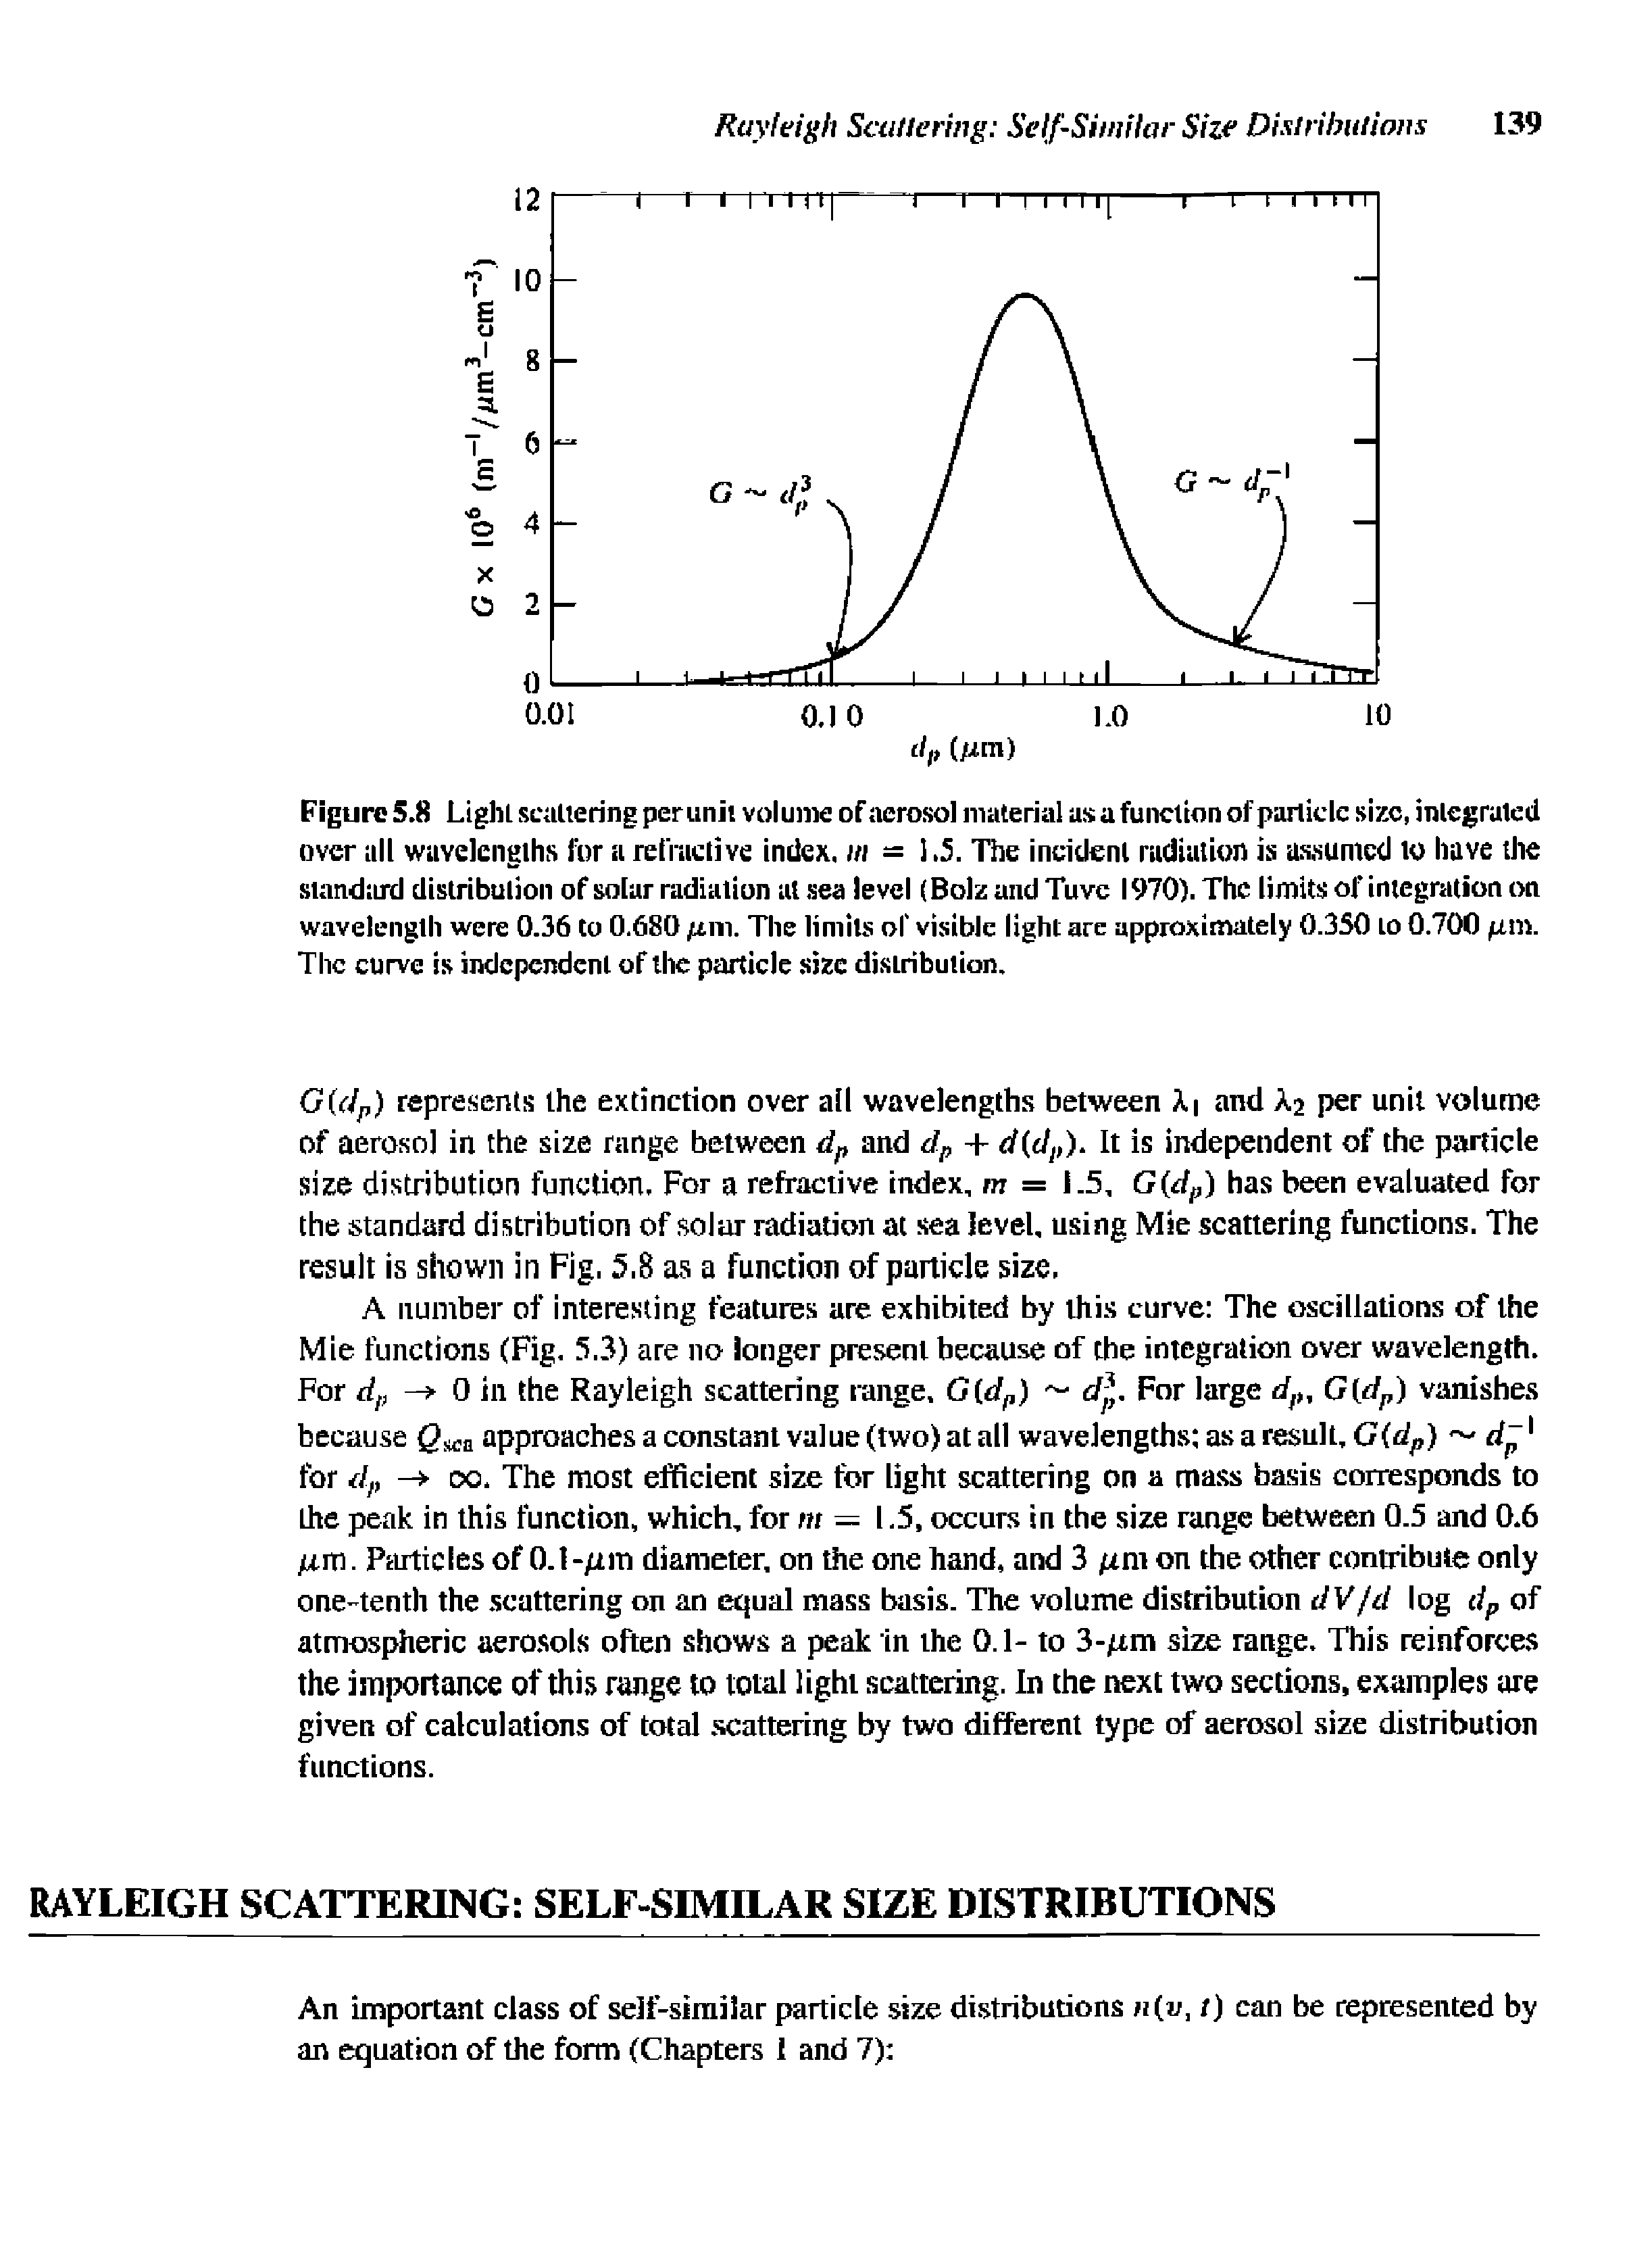 Figure 5.8 Light scaltering per unii volume of aerosol material us a function of parlidc size, integrated over all wavelengths for a relVaetive index, in = 1.5. The incident radiation is as.sumcd to have the standiird distribution of soiar radiation at. sea level (Bolz and Tuve 1970). The limits of integration on wavelength were 0.36 to 0.680 w. The limits of visible light are approximately 0.350 to 0.700 m. The curve is independent of the particle size distribution.